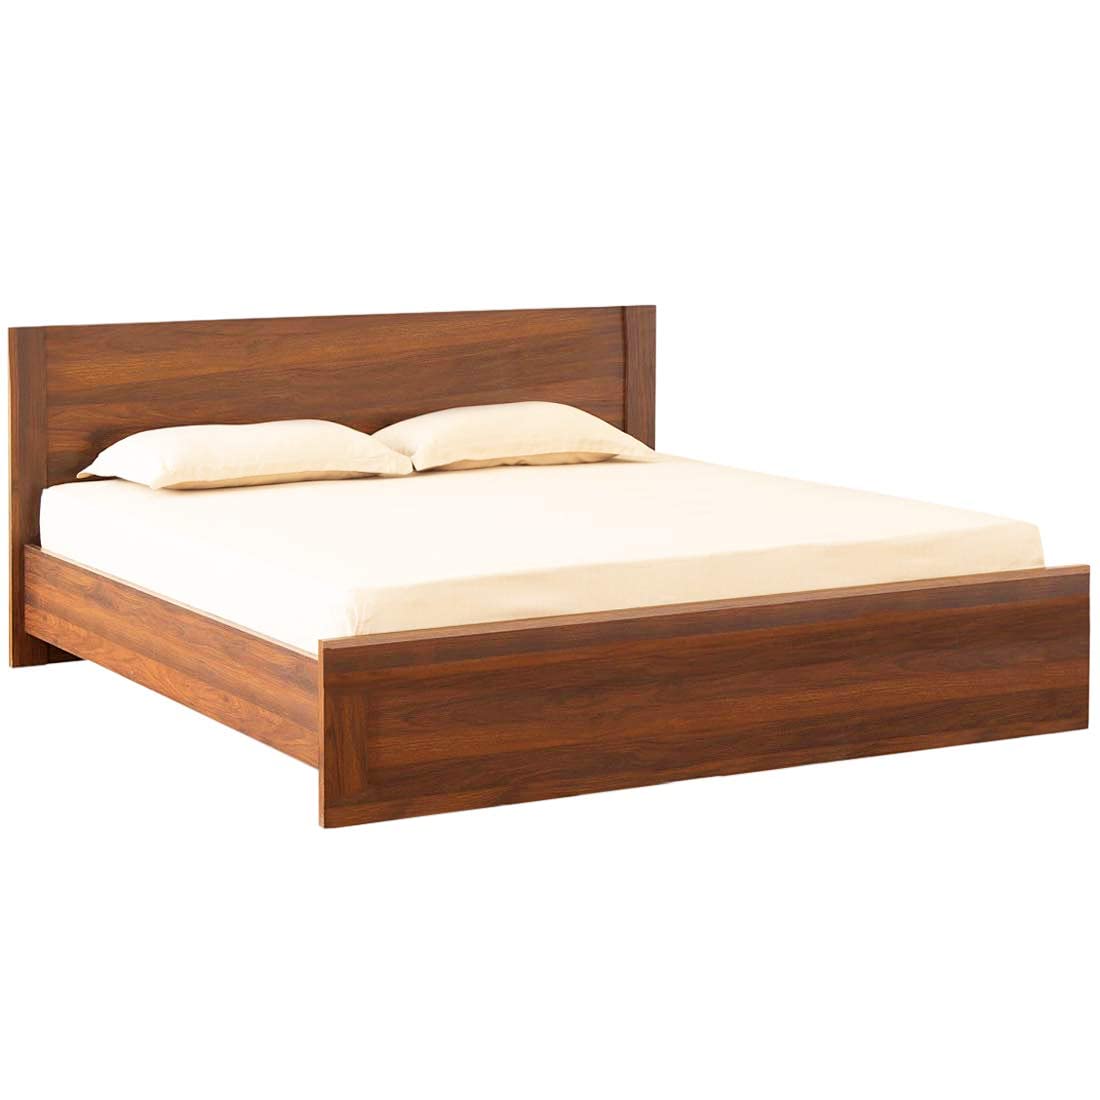 Bowzar Engineered Wood Queen Size Bed With Box Storage